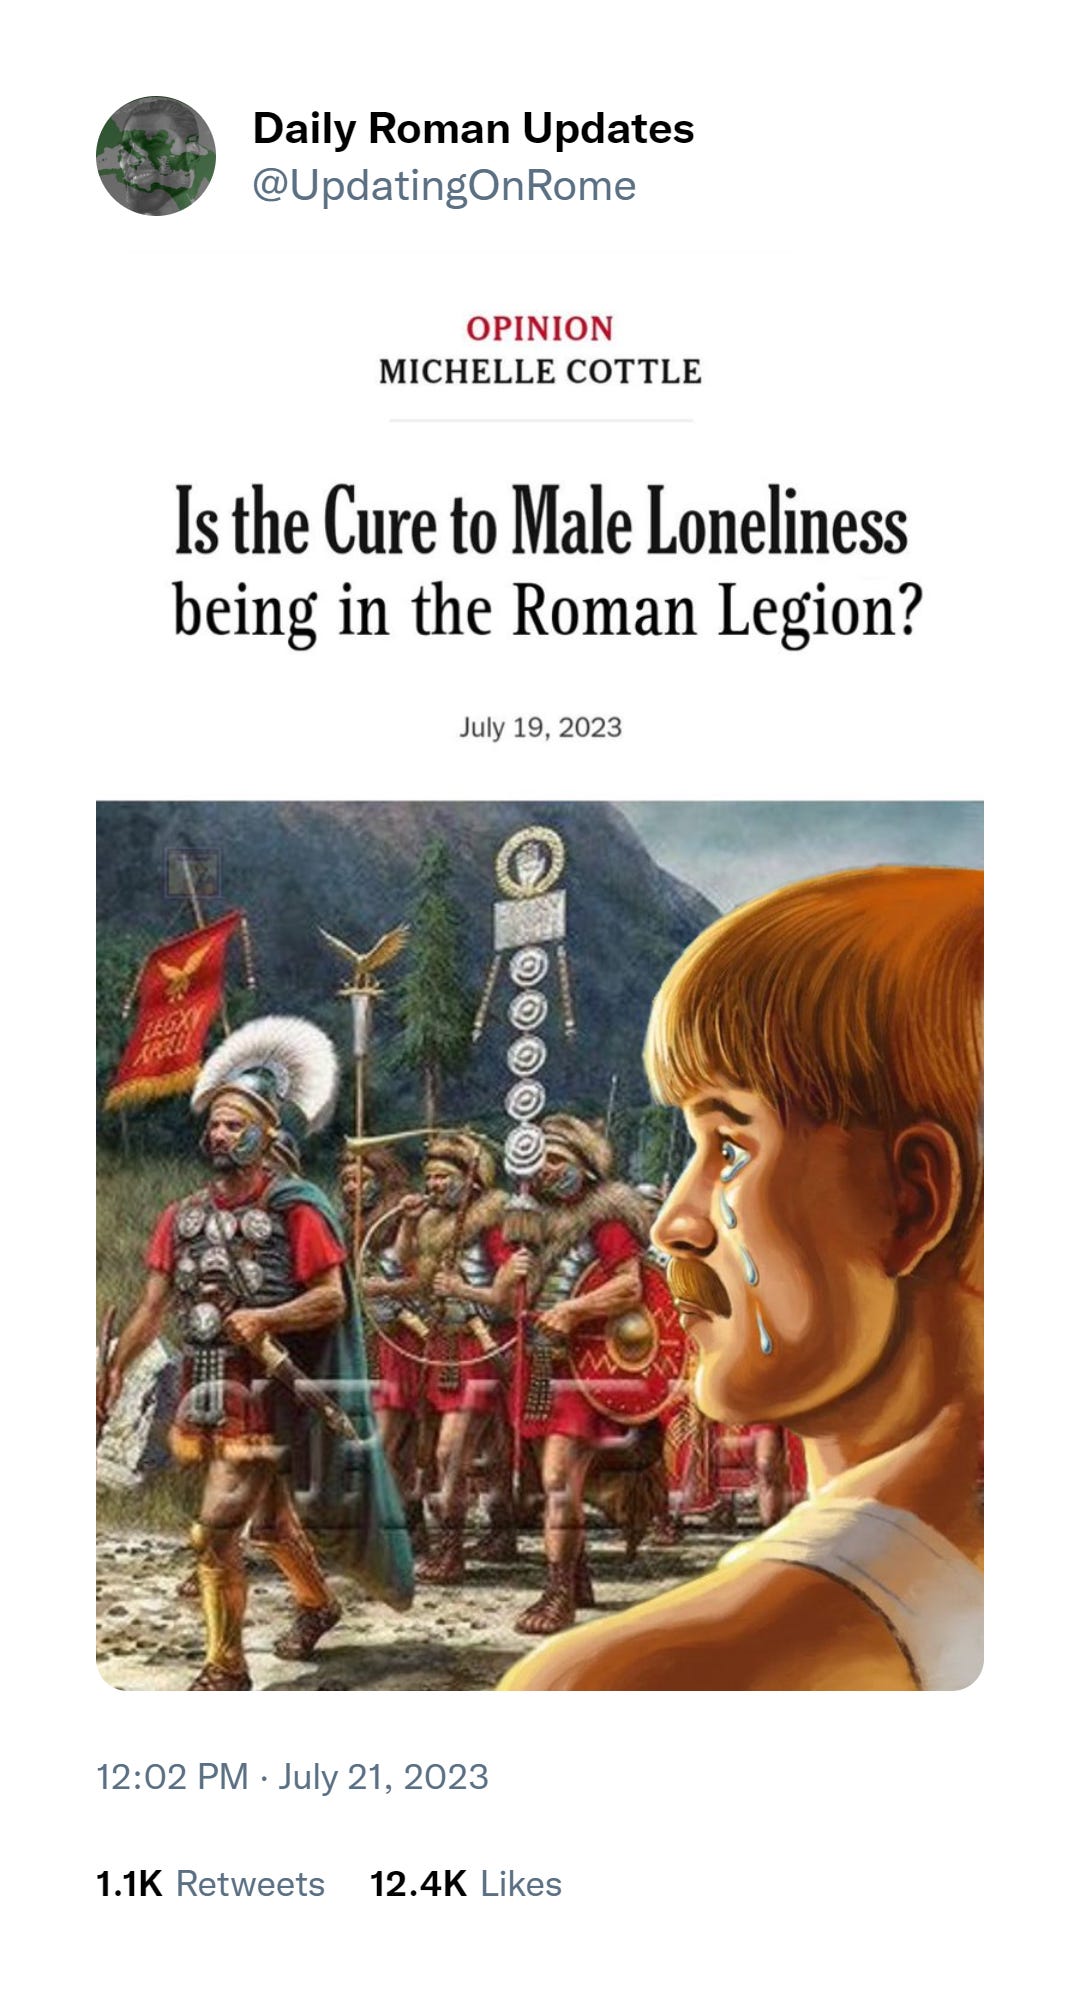 Tweet: "Is the Cure to Male Loneliness being in the Roman Legion?" Photoshopped image of male crying in front a painting of Roman soldiers.